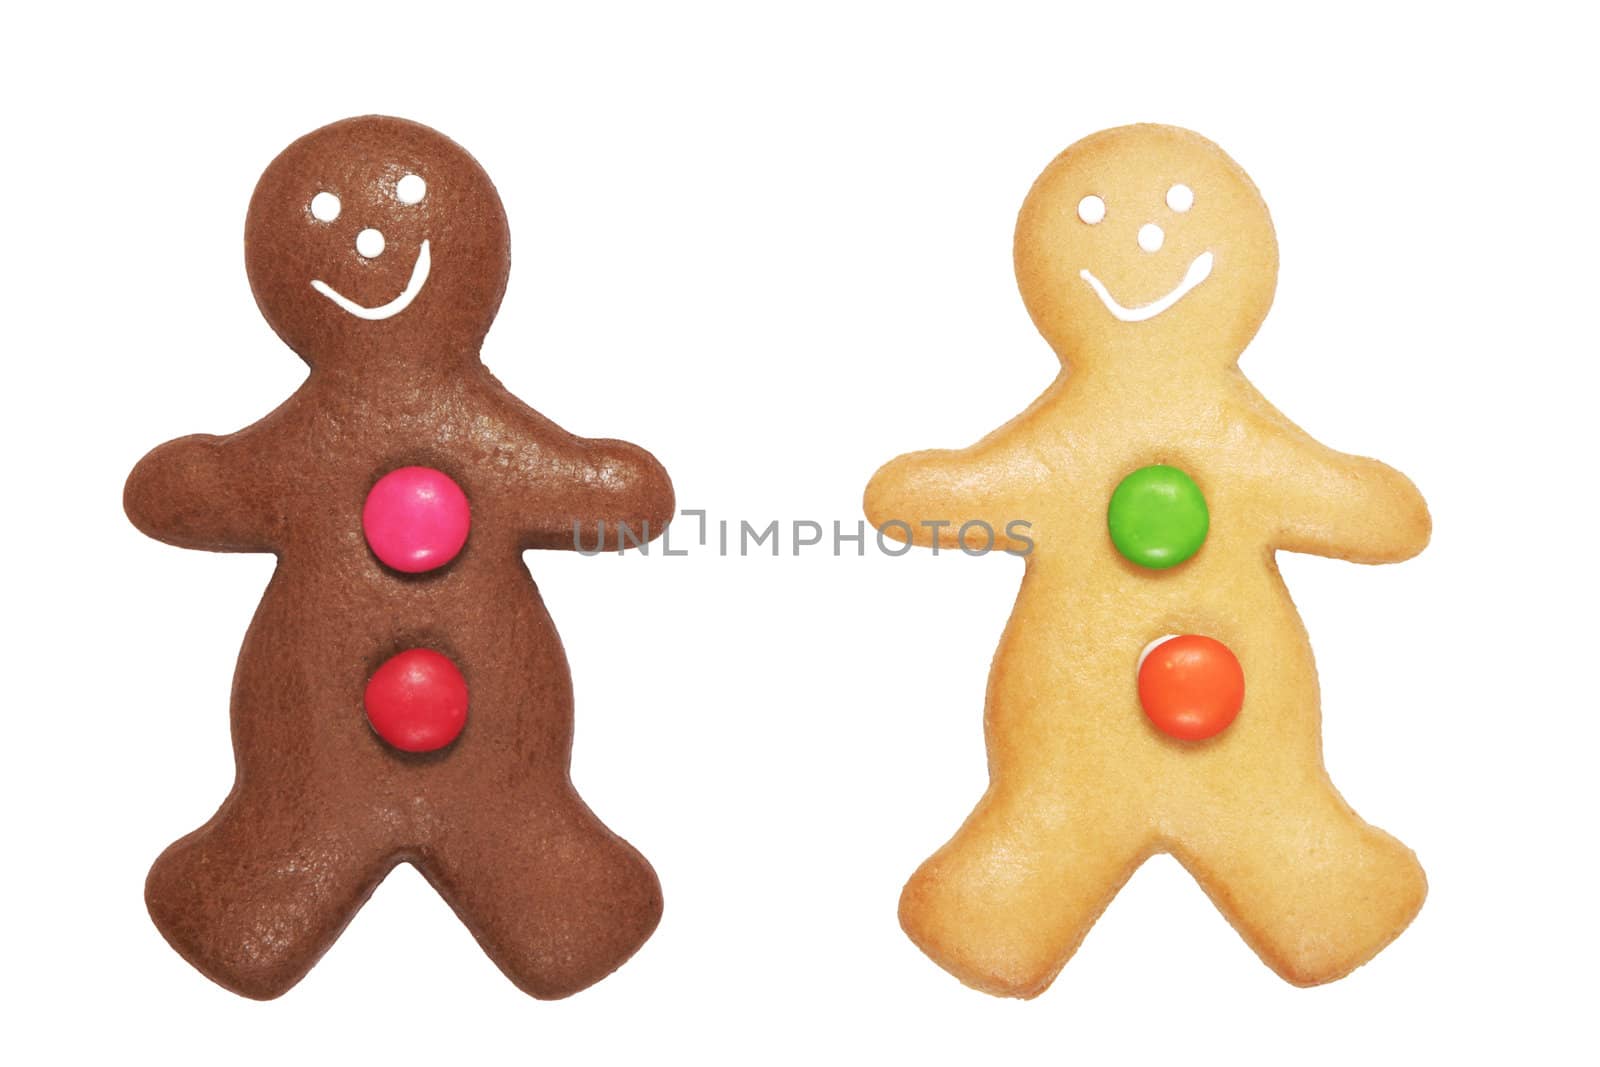 Gingerbread Man by thorsten